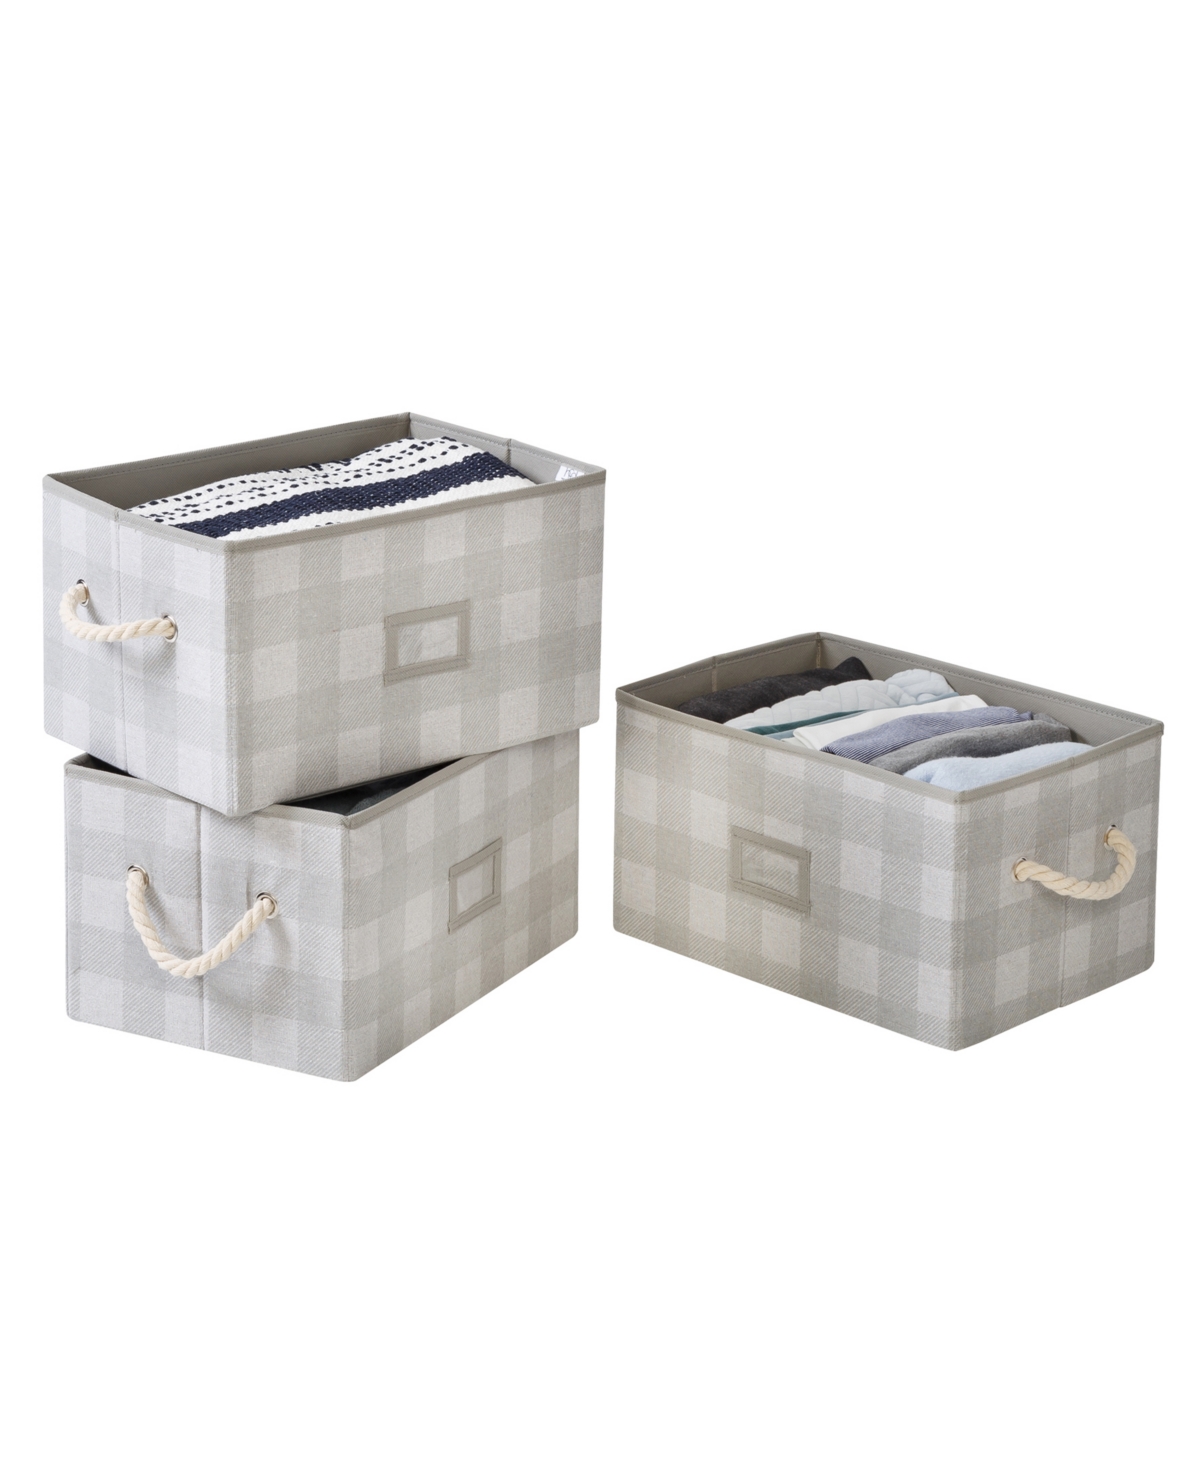 Honey Can Do Set Of 3 Collapsible Large Fabric Storage Bins With Handles, Stripes In Multi